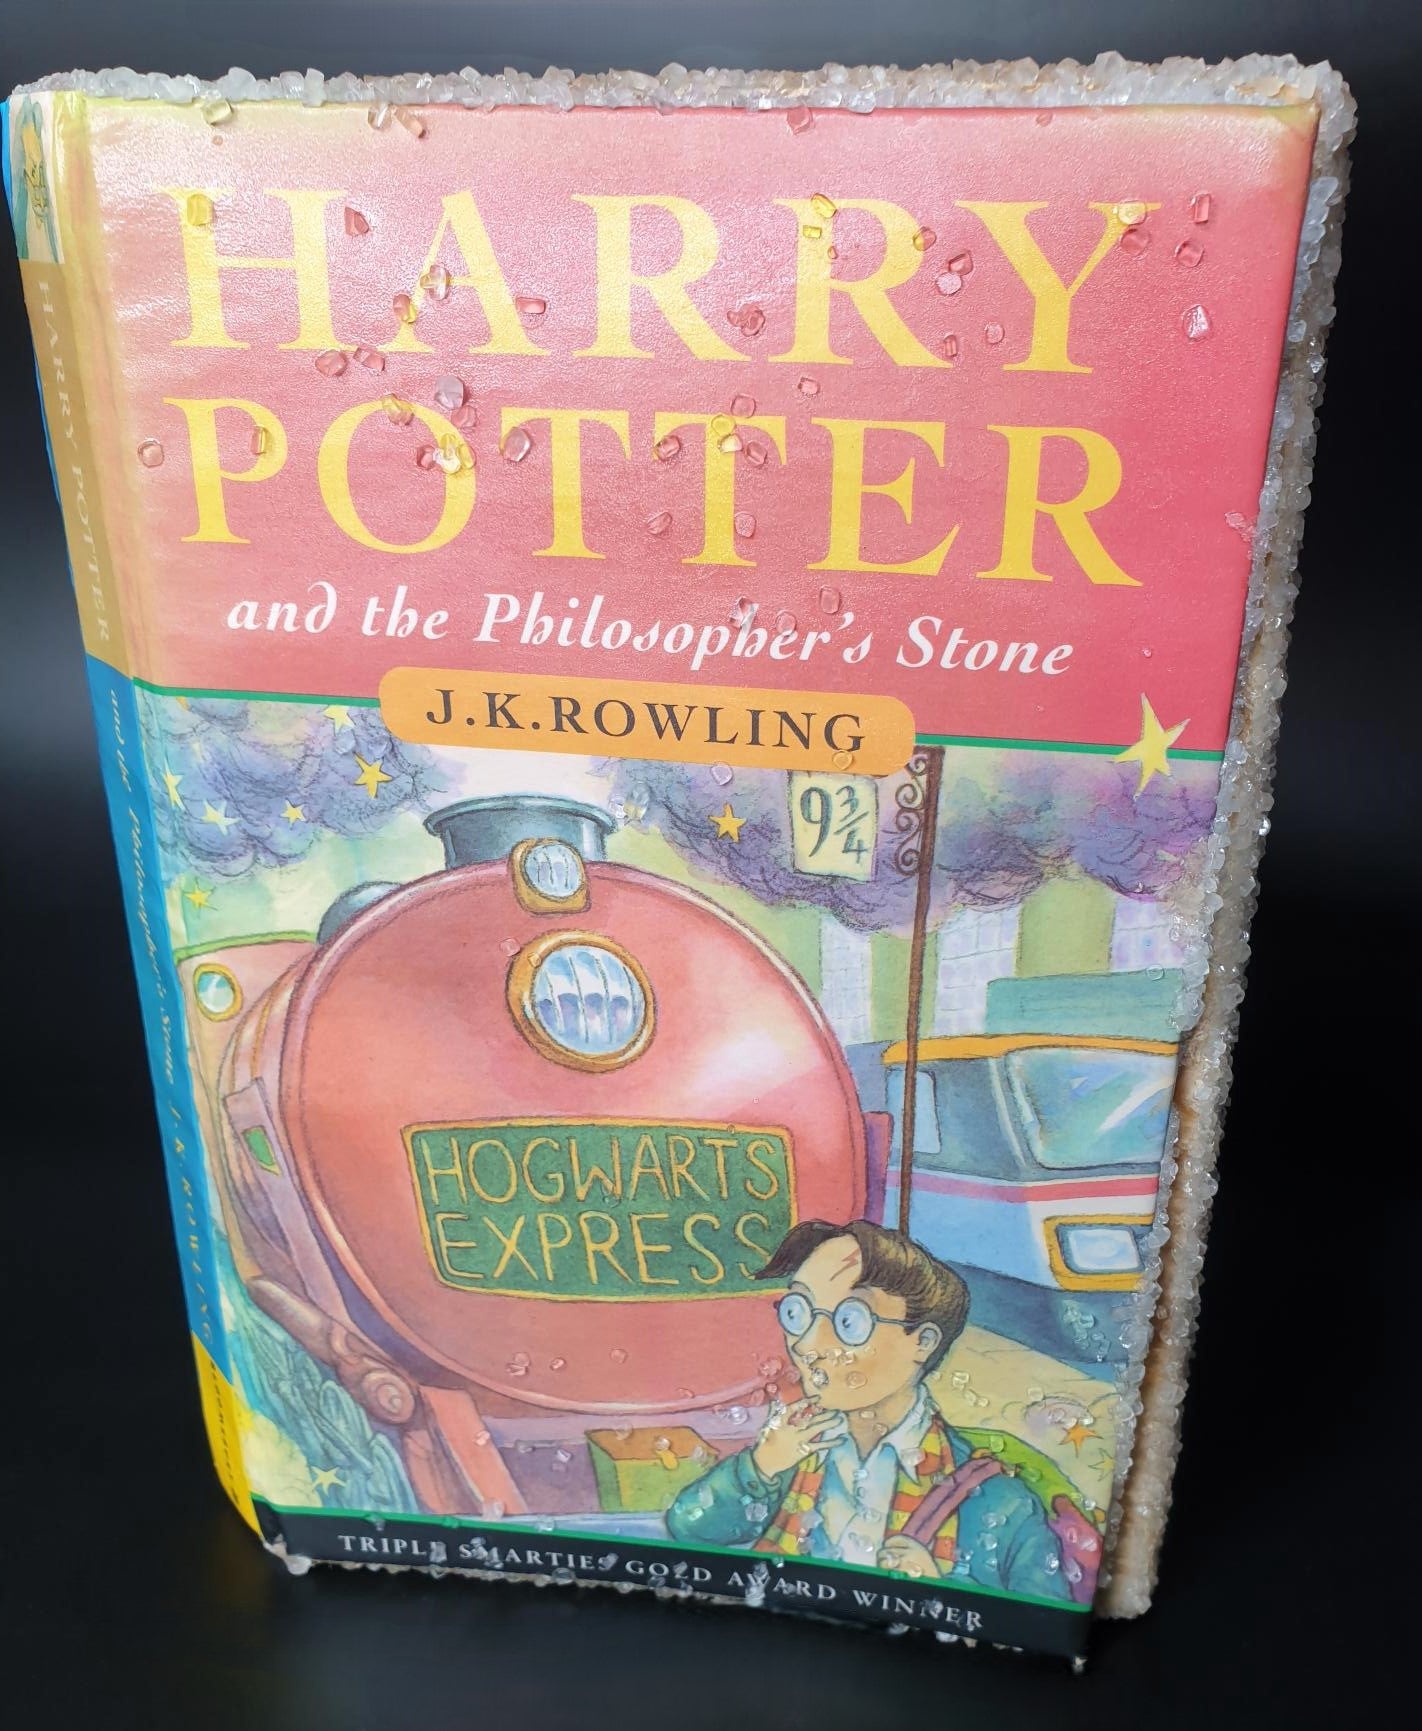 'Harry Potter and the Philosopher's Stone' By J.K. Rowling